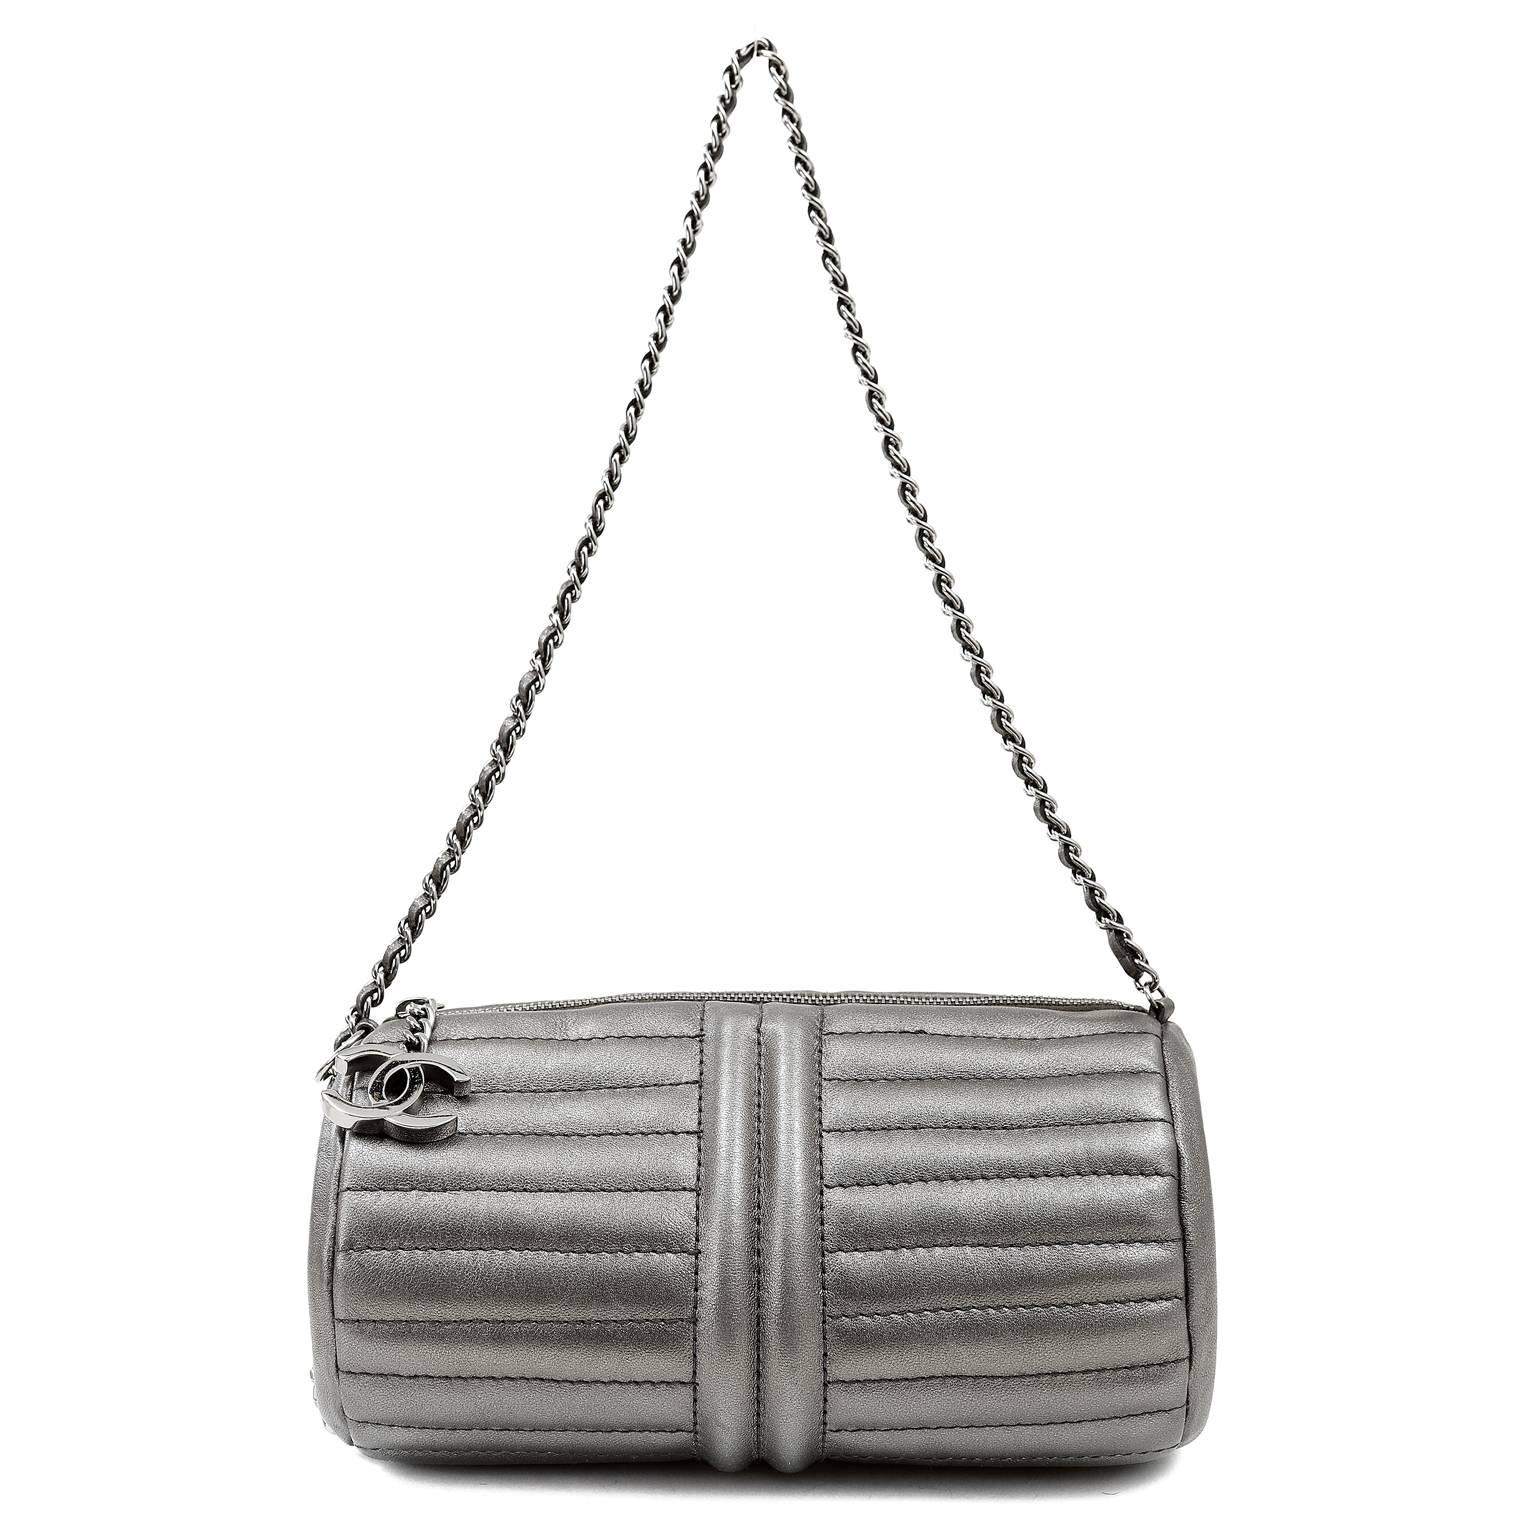 Chanel Vintage Pewter Leather Duffle Style Bag 5